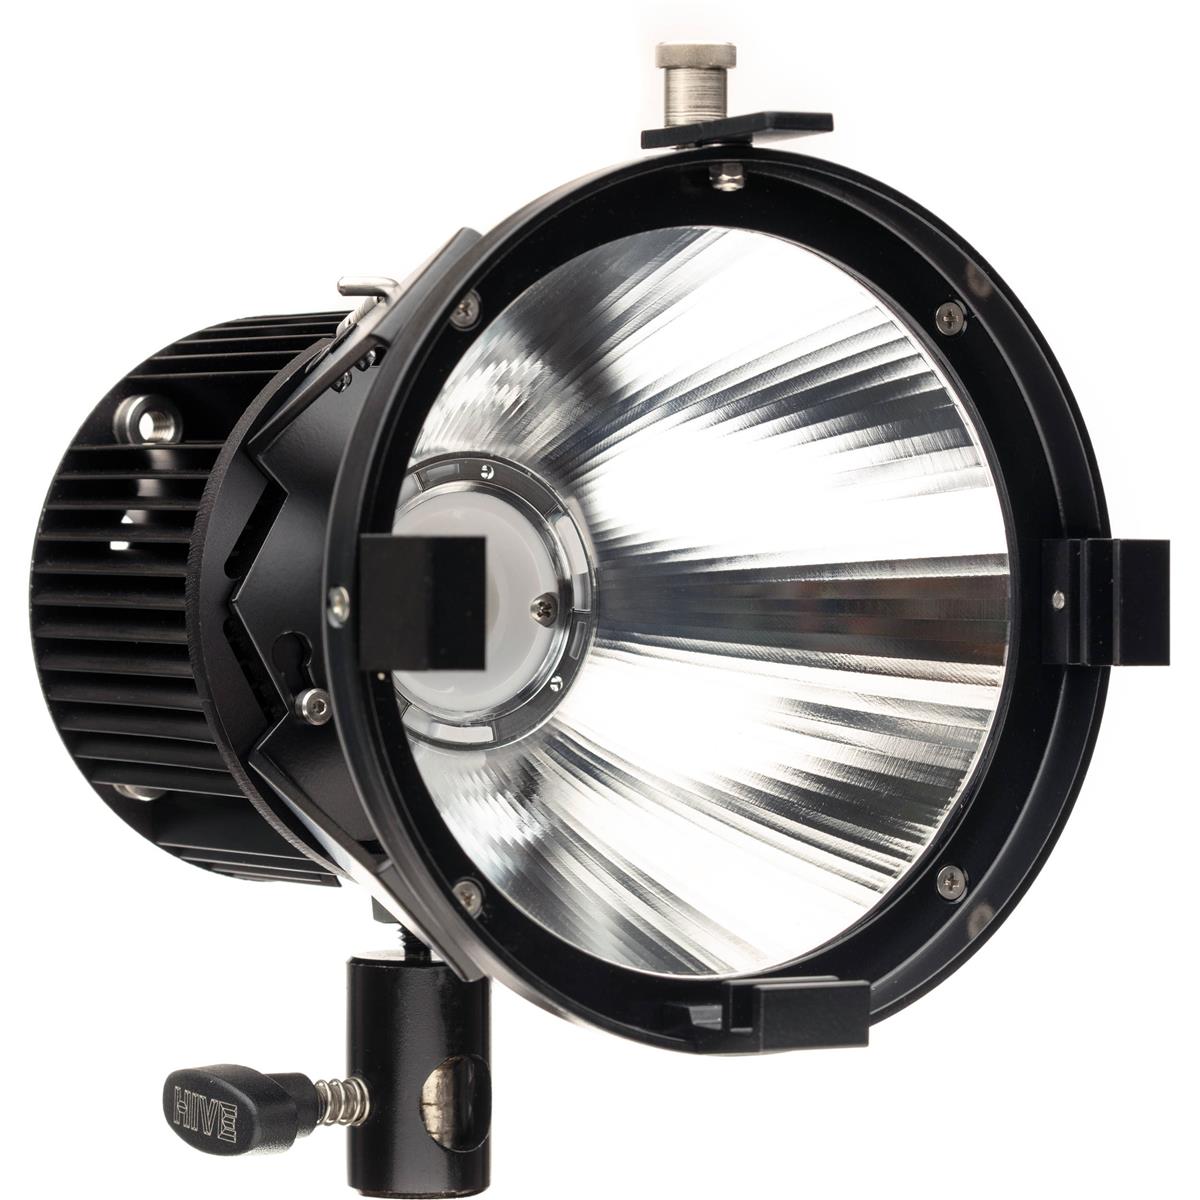 Image of Hive Bumble Bee 25-C Par Spot Omni-Color LED Light with Reflector and Barn Doors